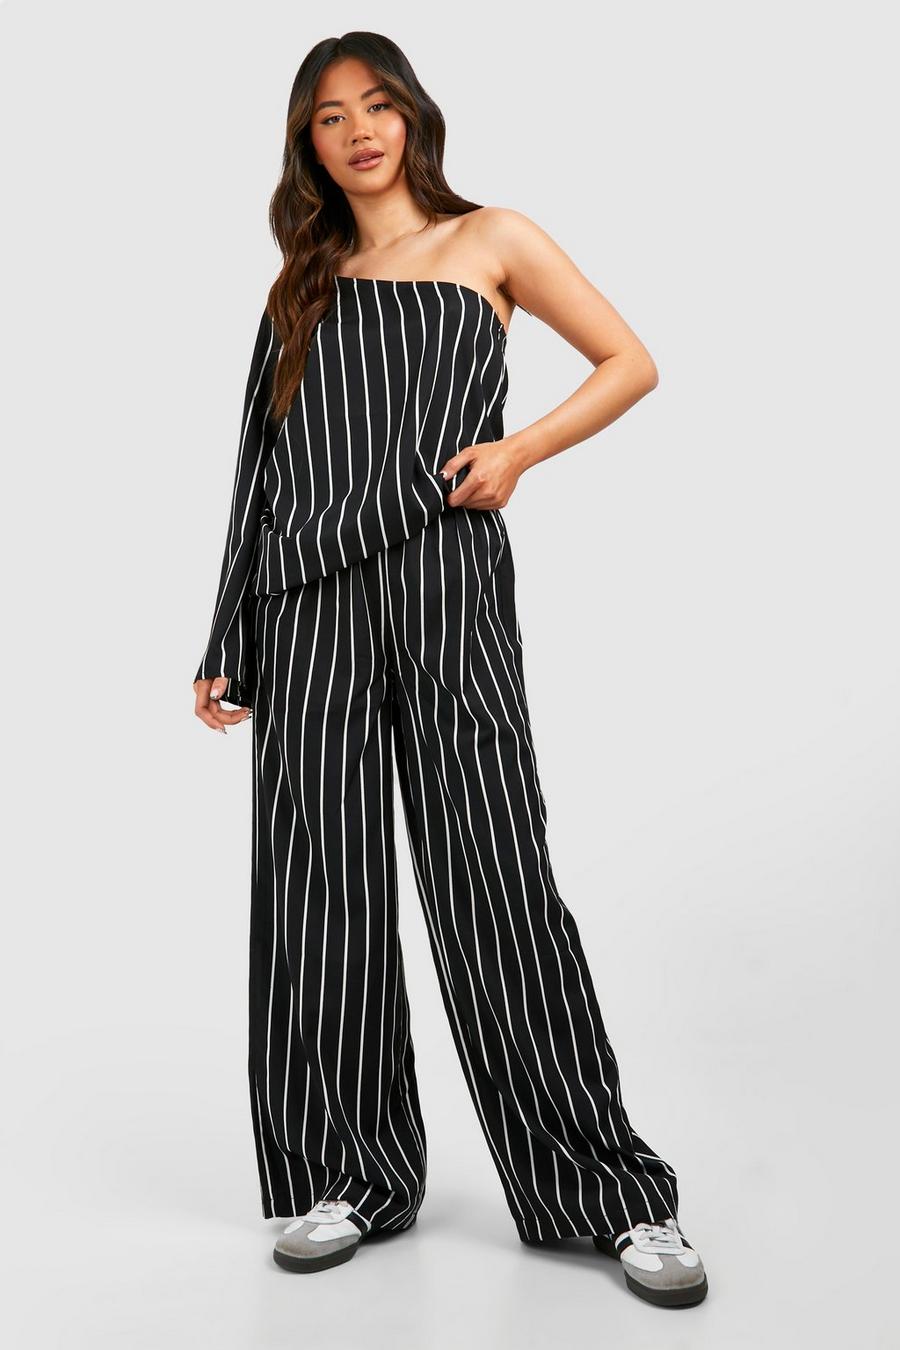 Black Stripe Top And Pants Co Ord